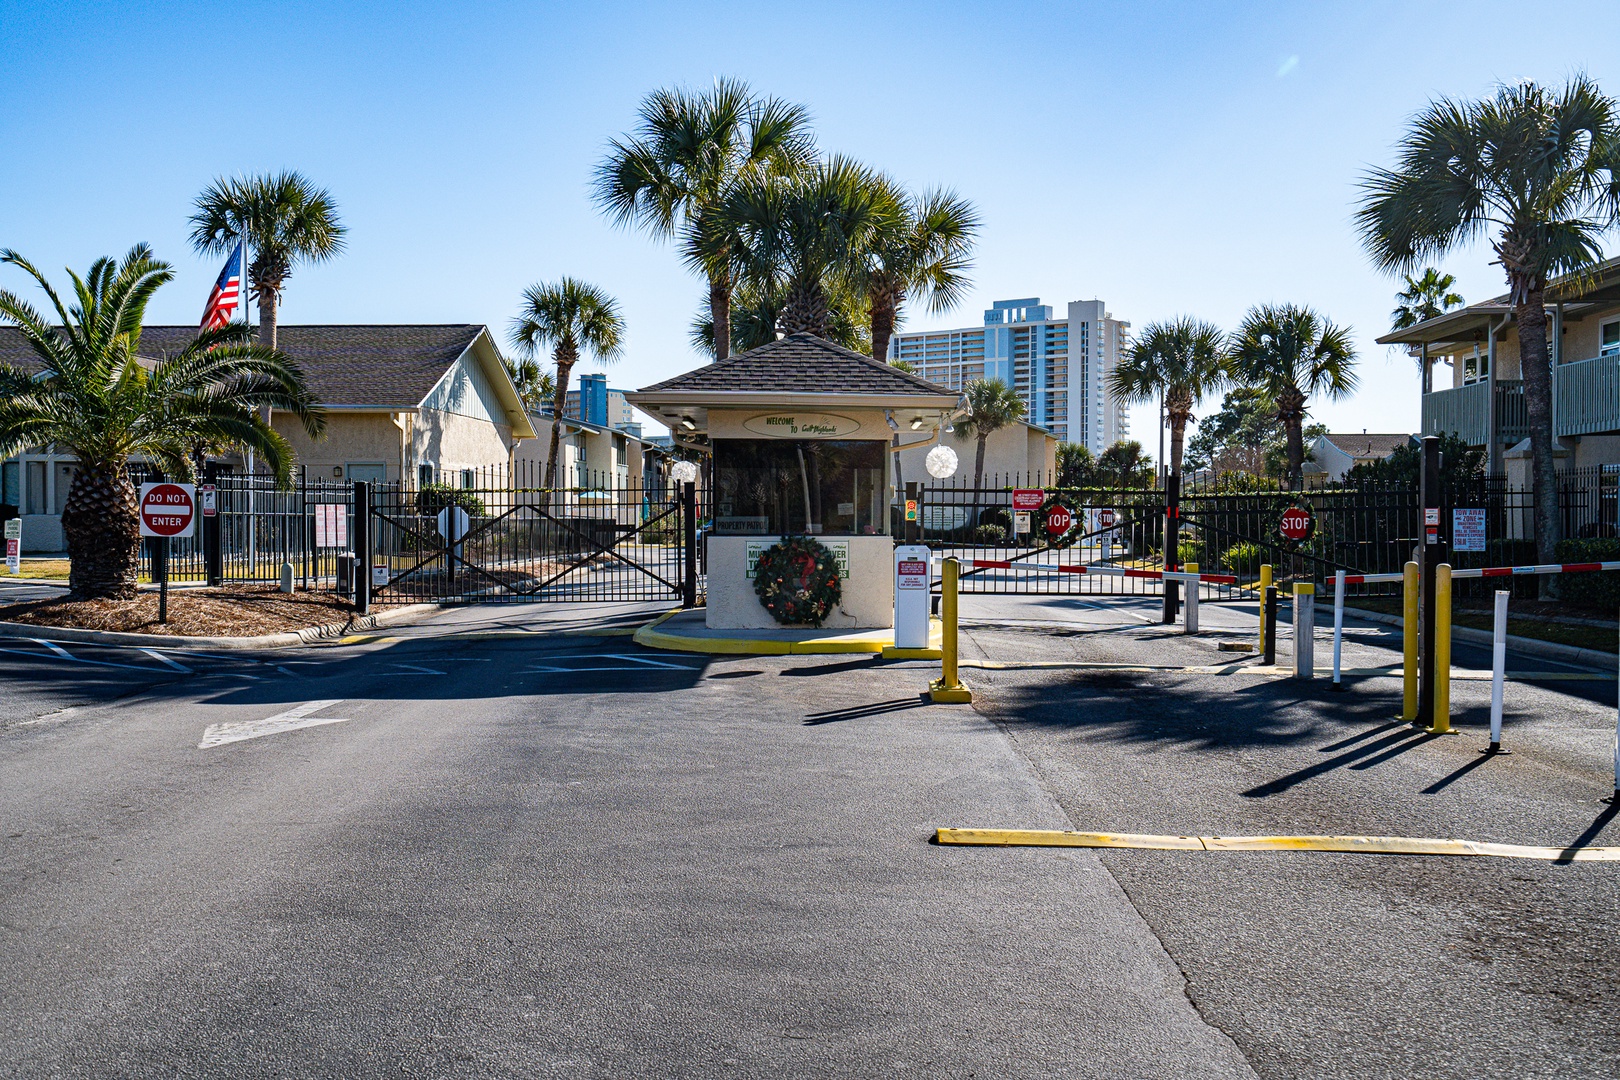 Make a quick stop at the security gate for your complimentary parking passes